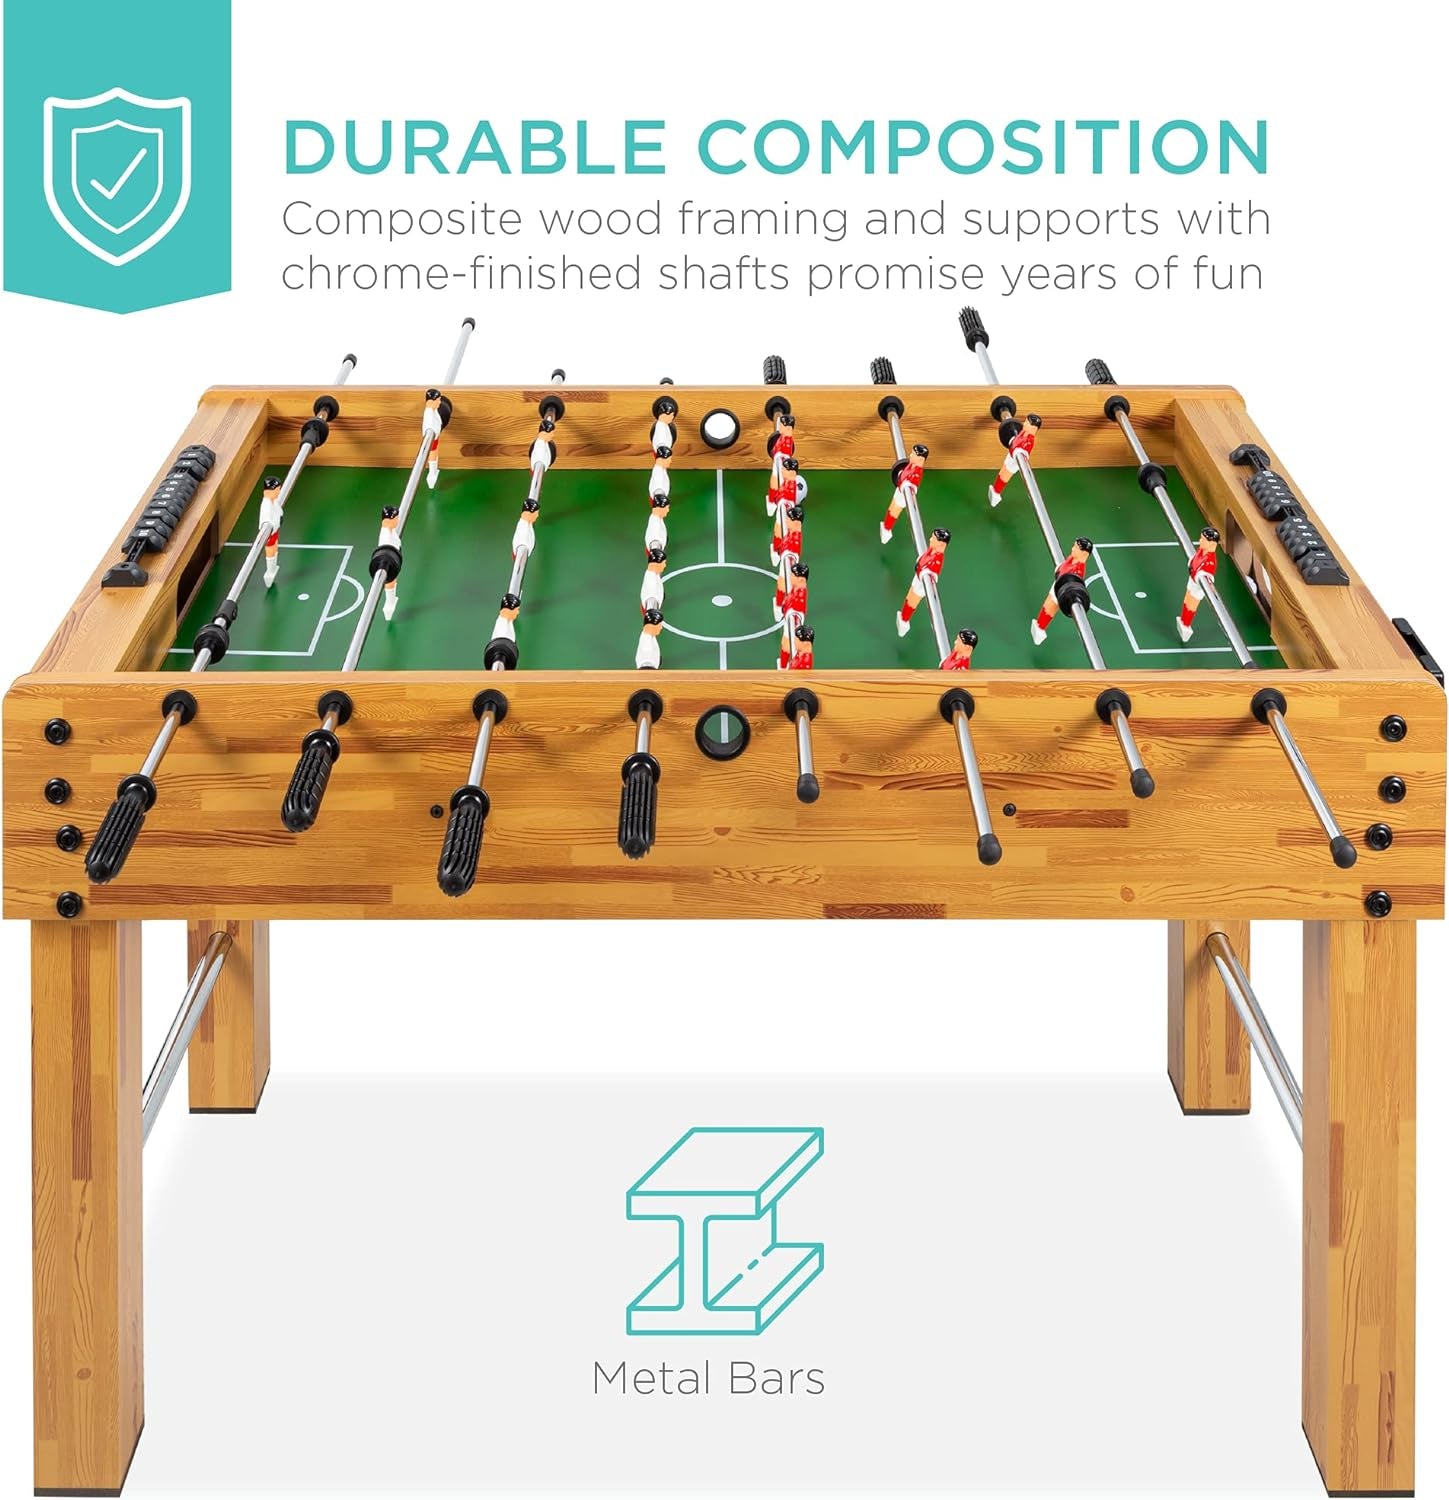 48In Competition Sized Foosball Table for Home, Game Room W/ 2 Balls, 2 Cup Holders